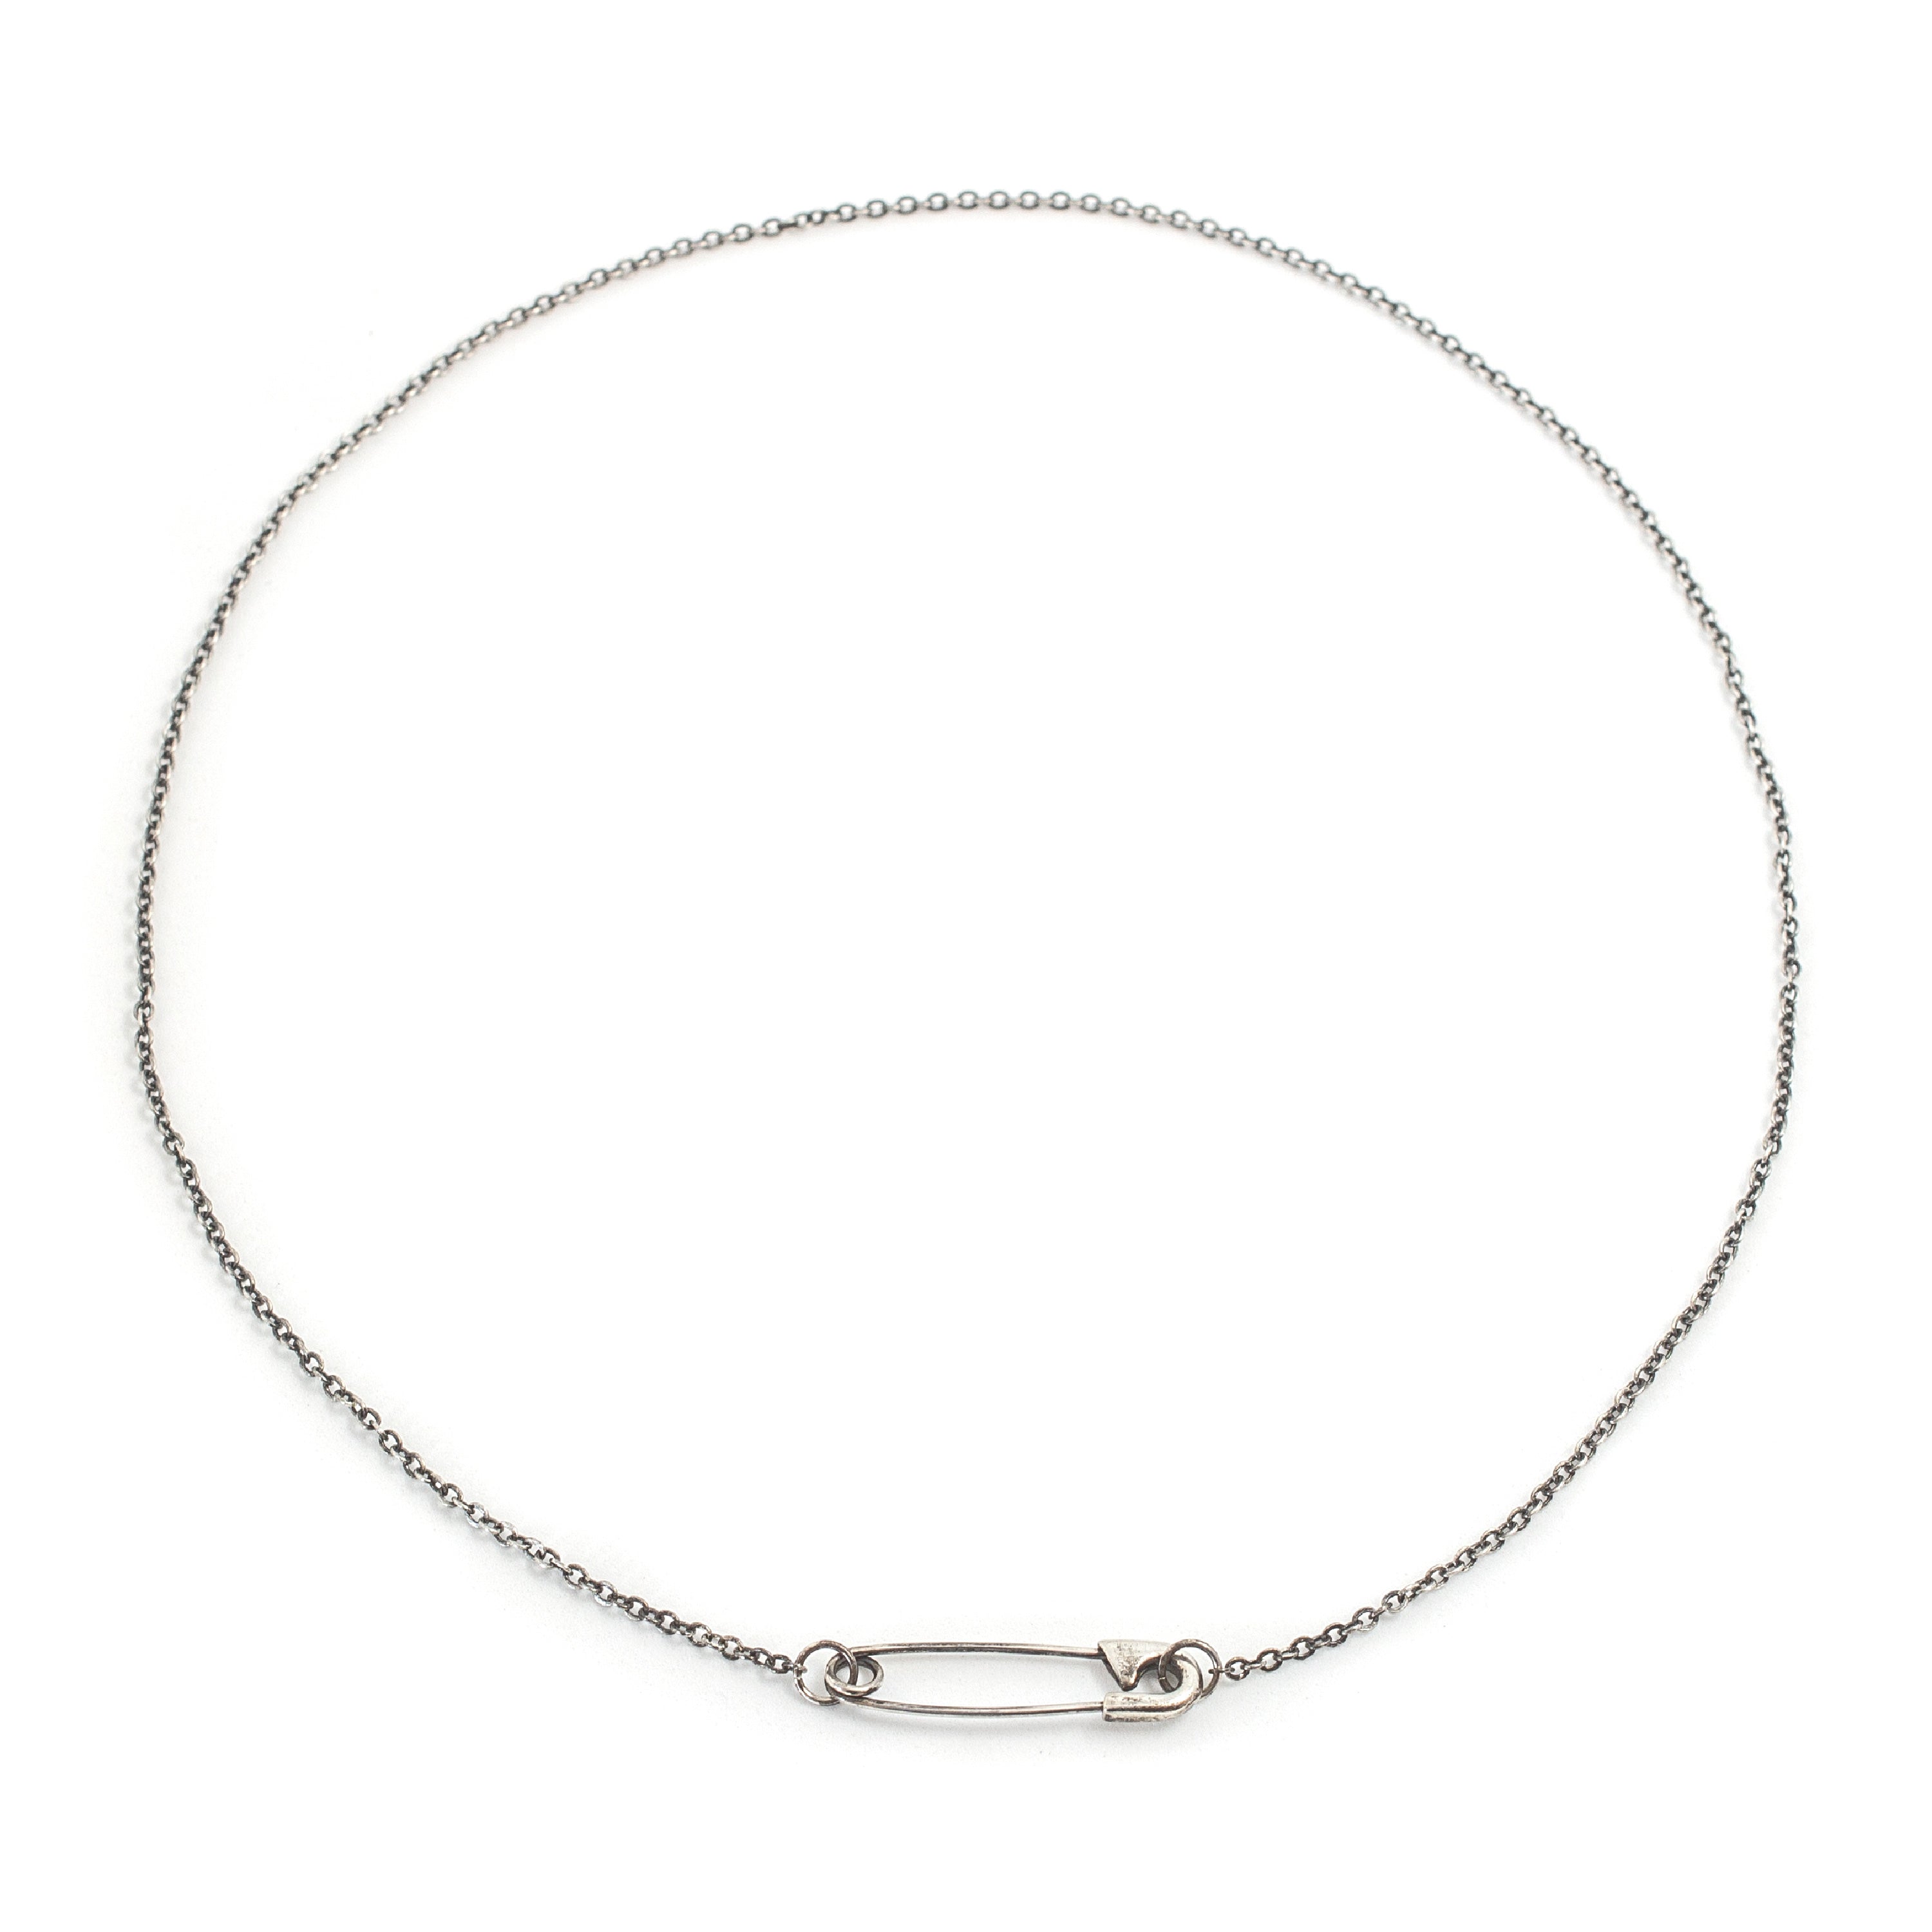 Safety Pin Necklace - Sterling Silver